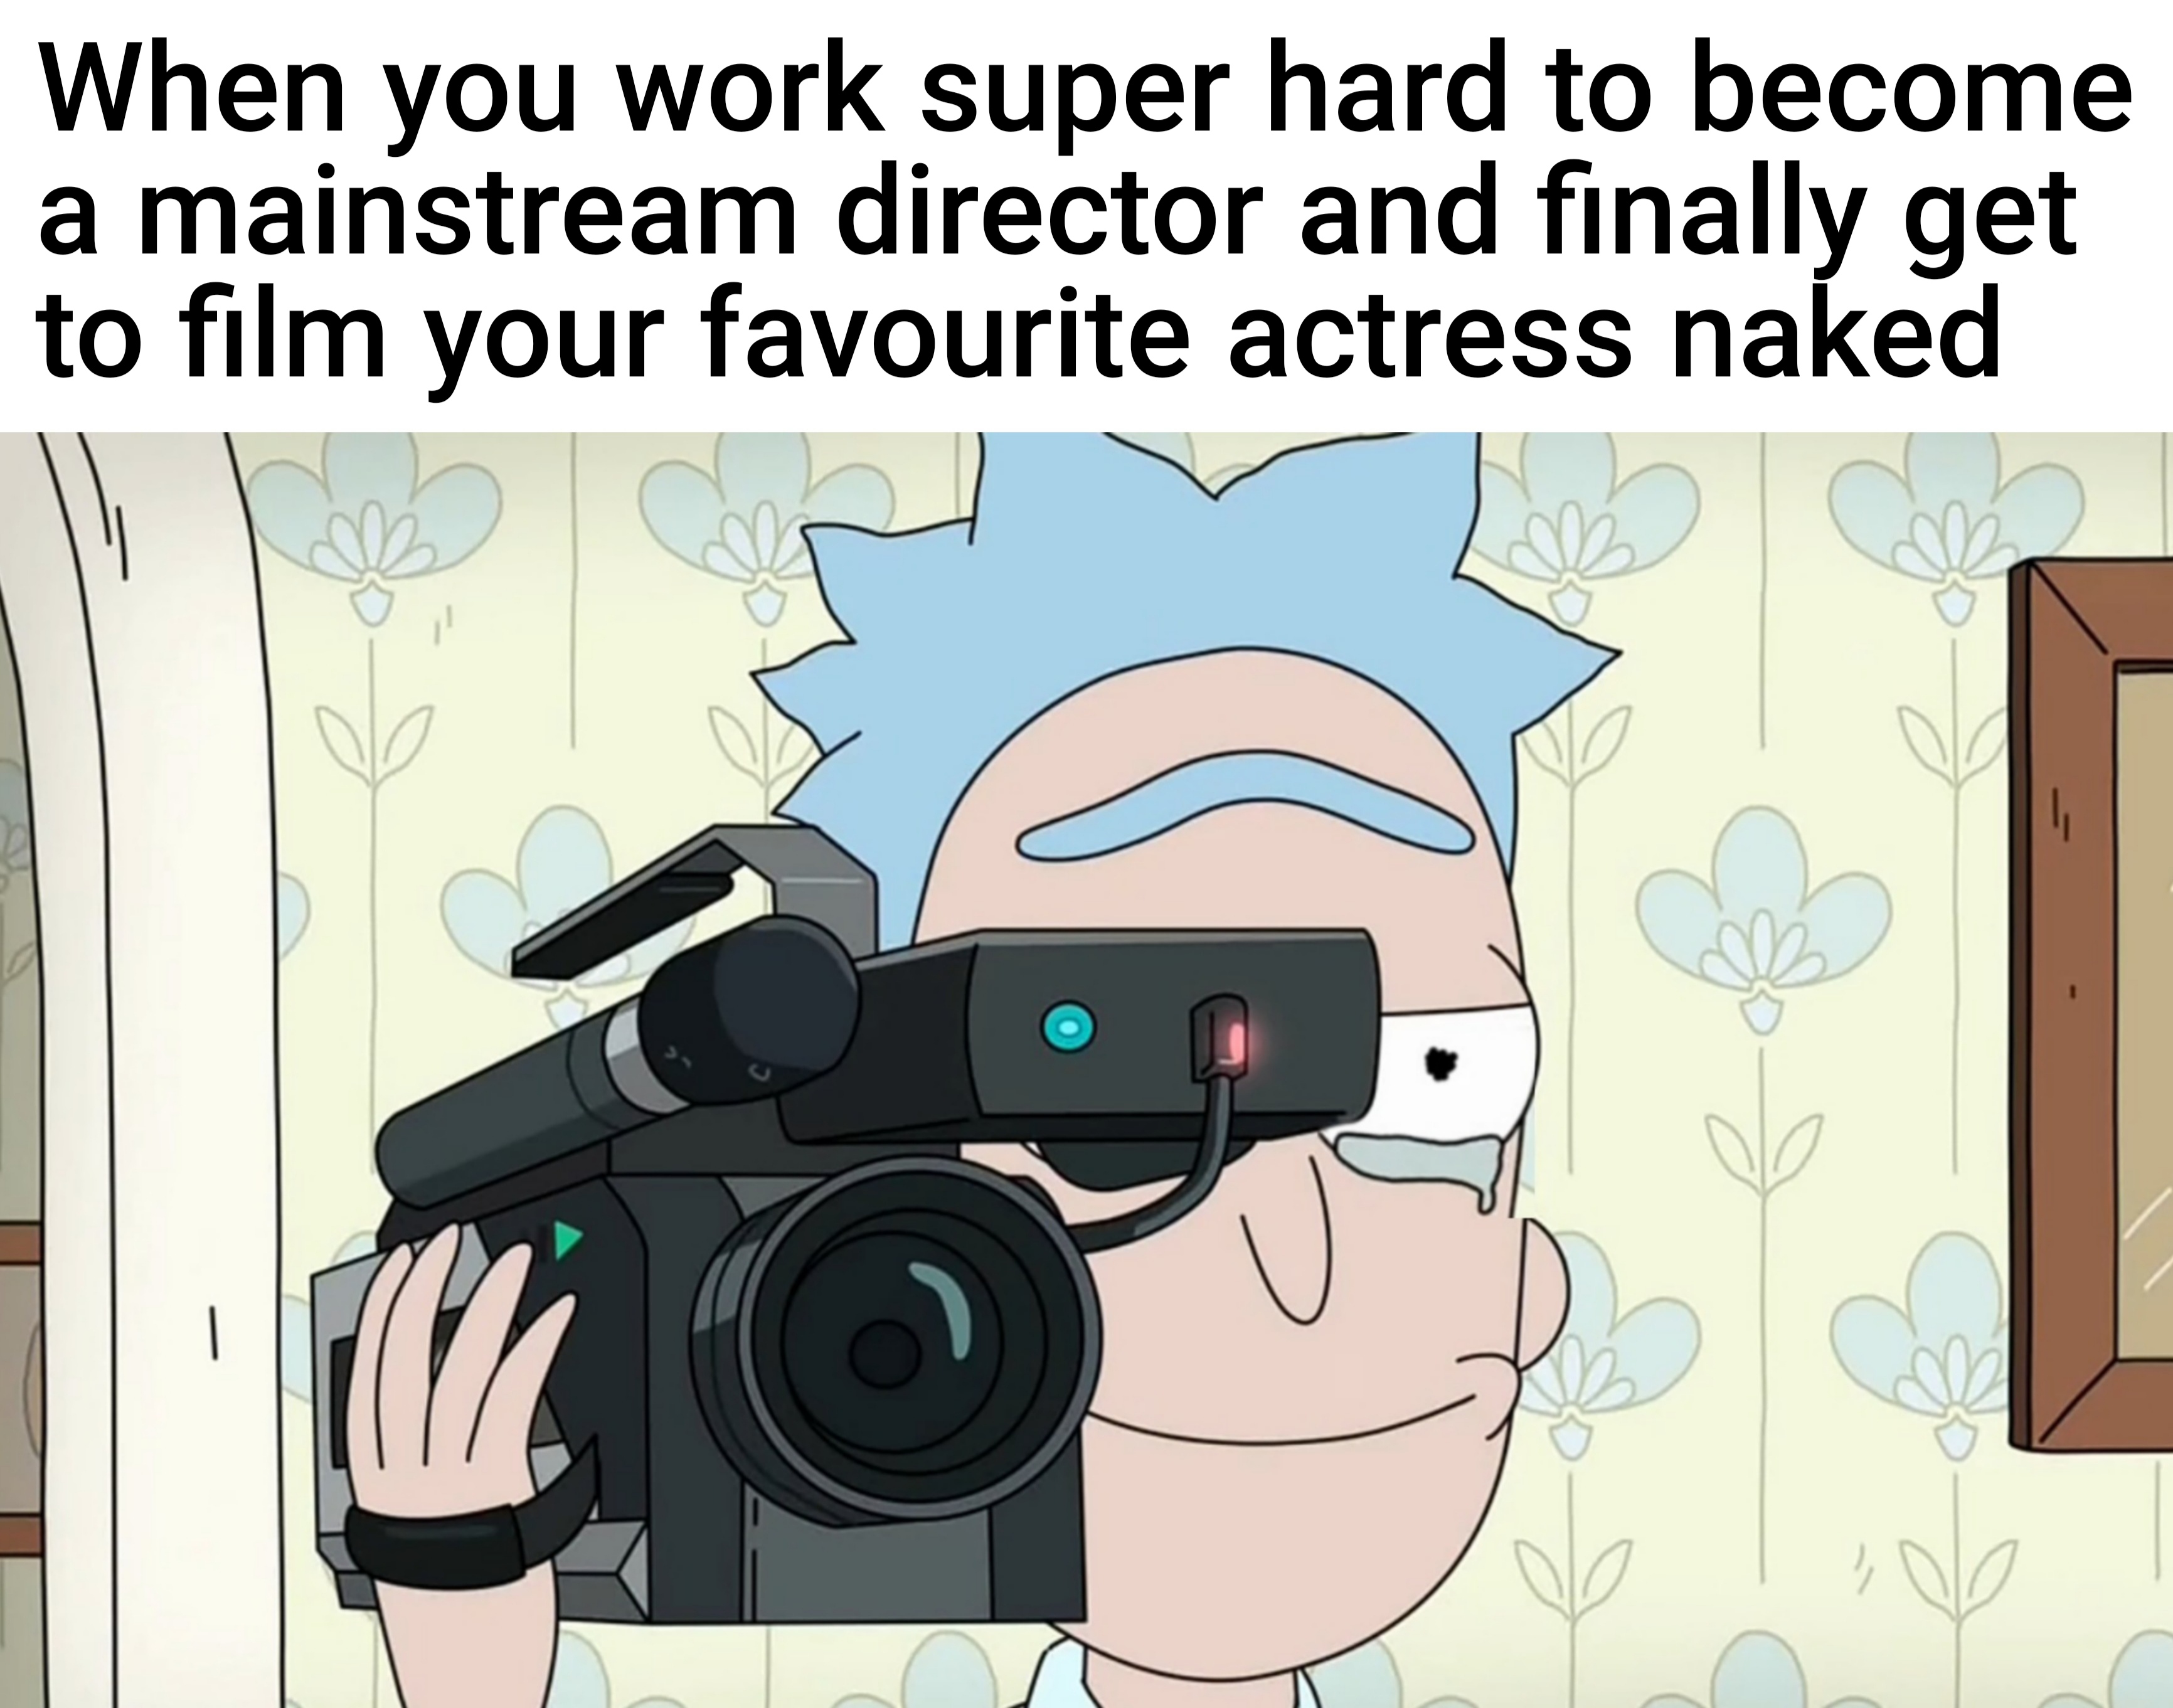 dank memes - funny memes - love daddy rick and morty - When you work super hard to become a mainstream director and finally get to film your favourite actress naked all